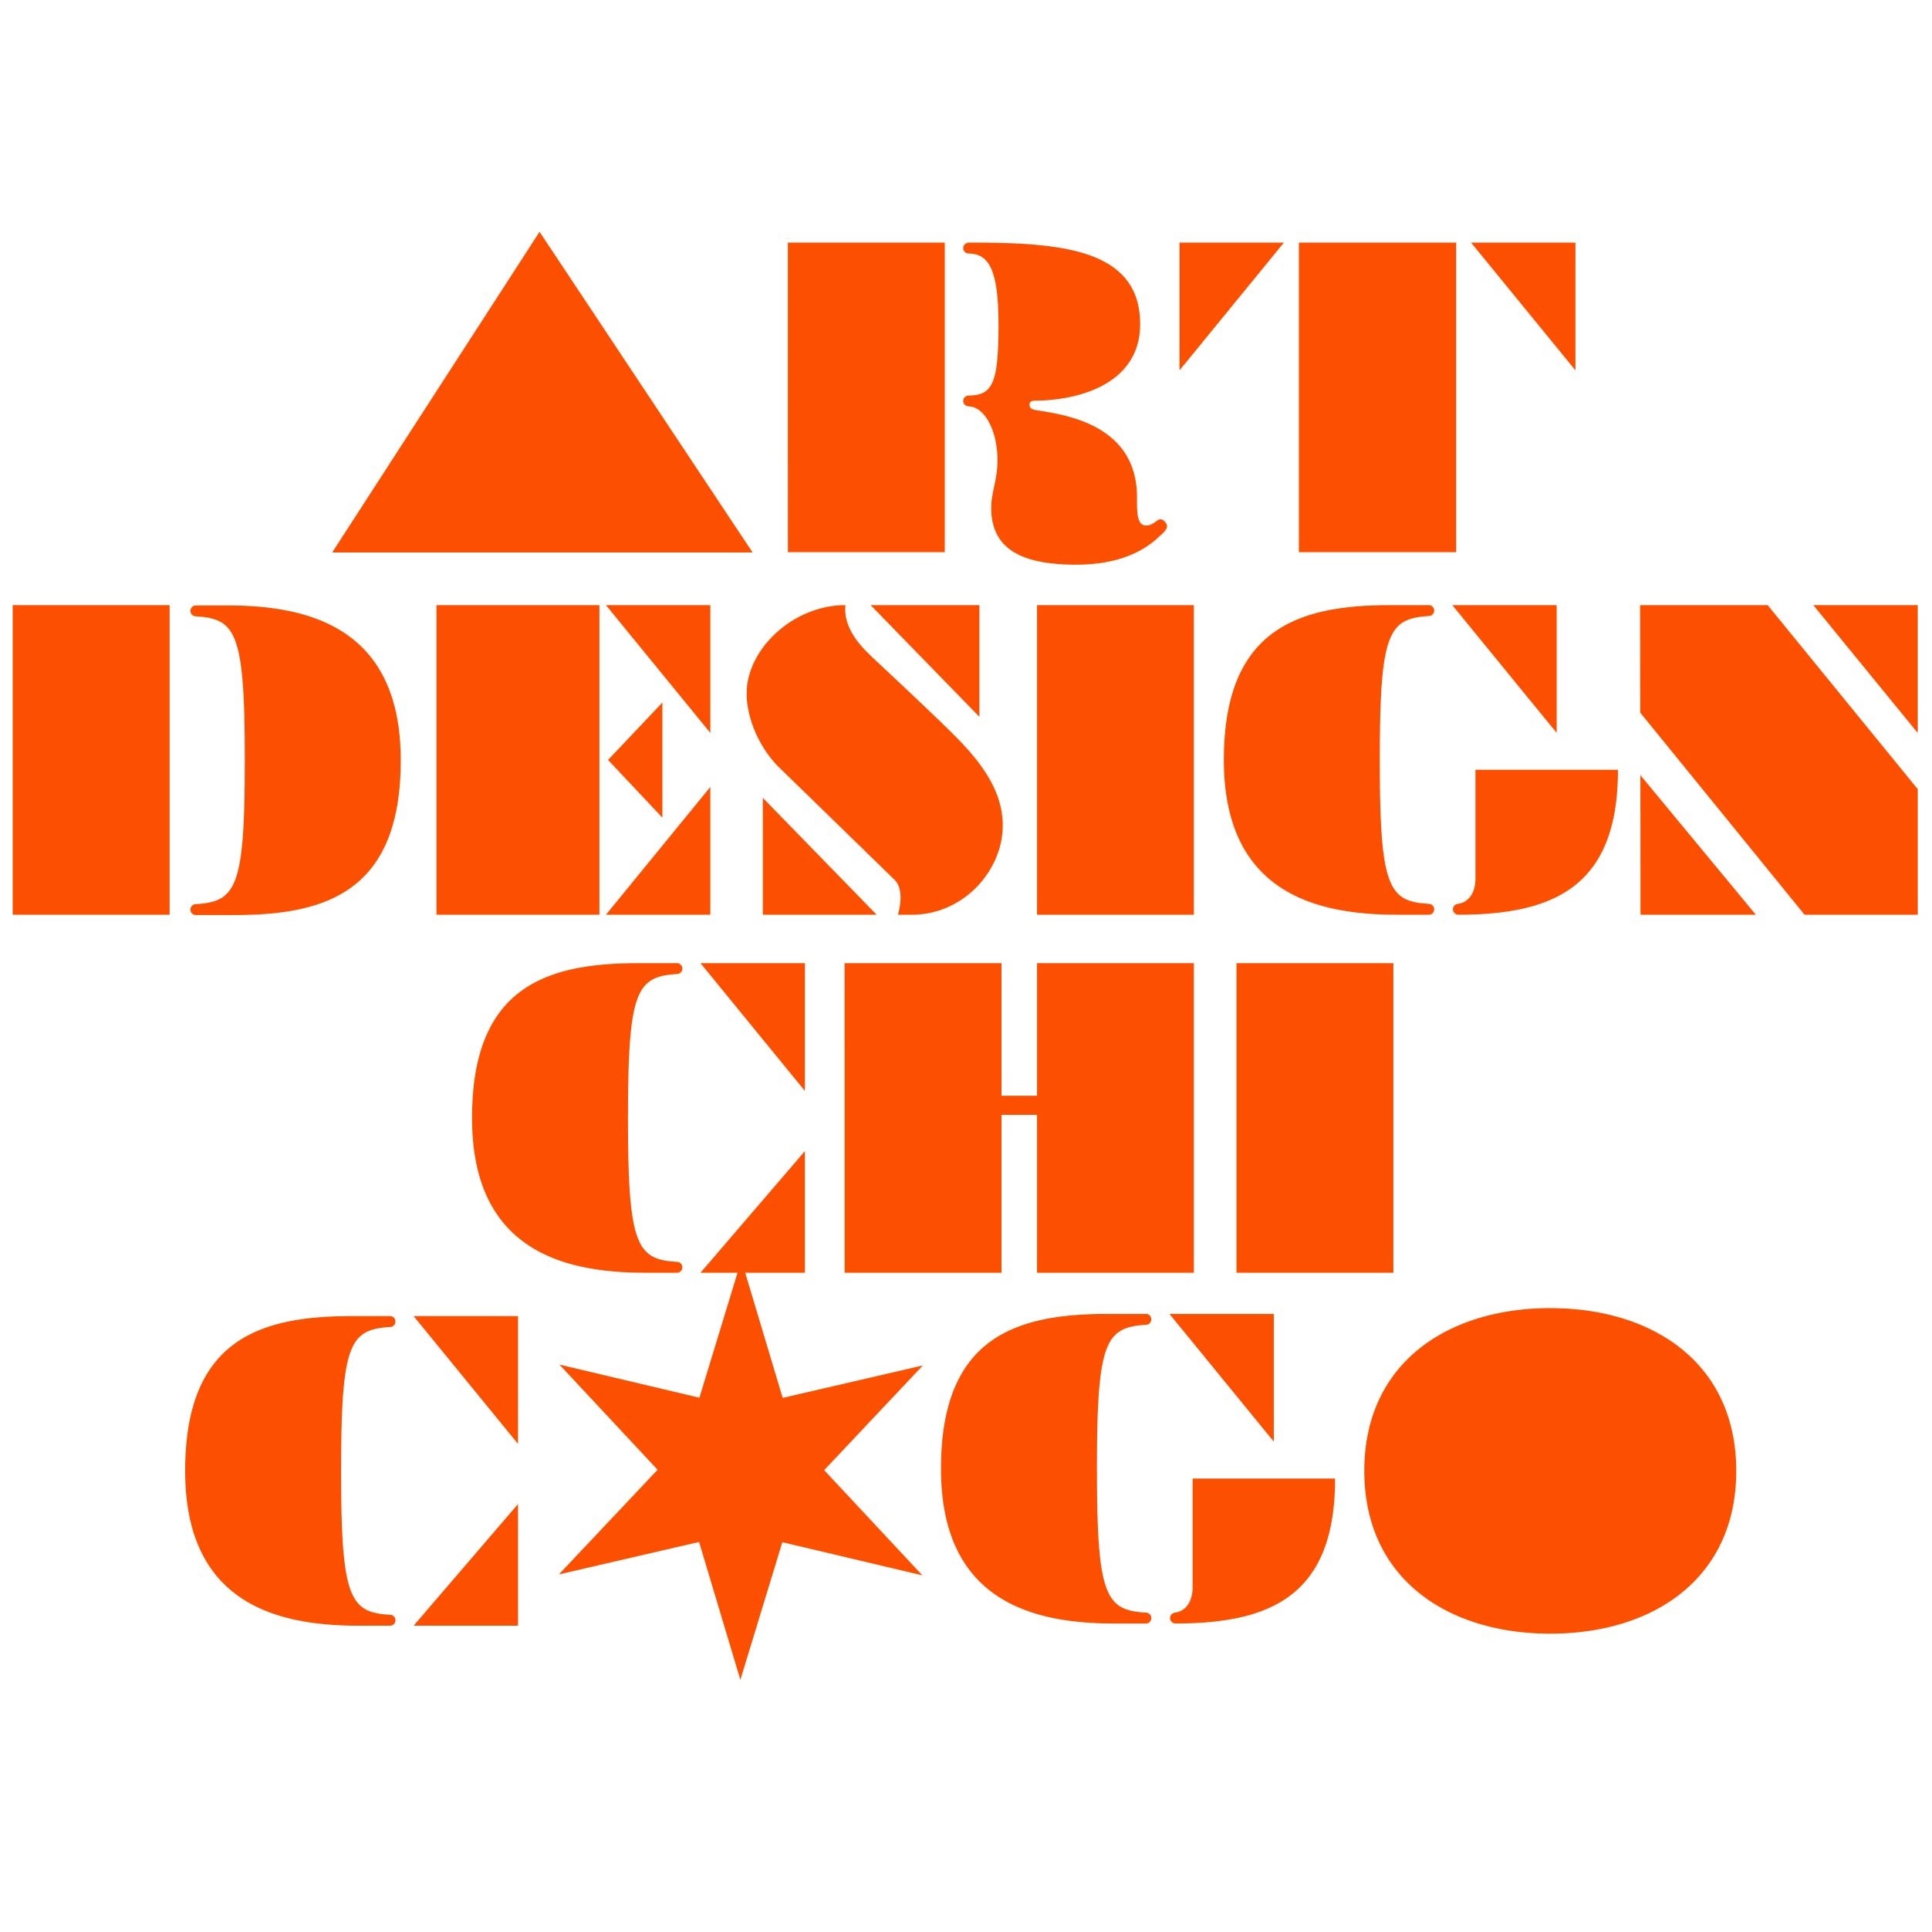 Logo that says "Art Design Chicago" in bold, orange font. The "A" in Chicago looks like a star.